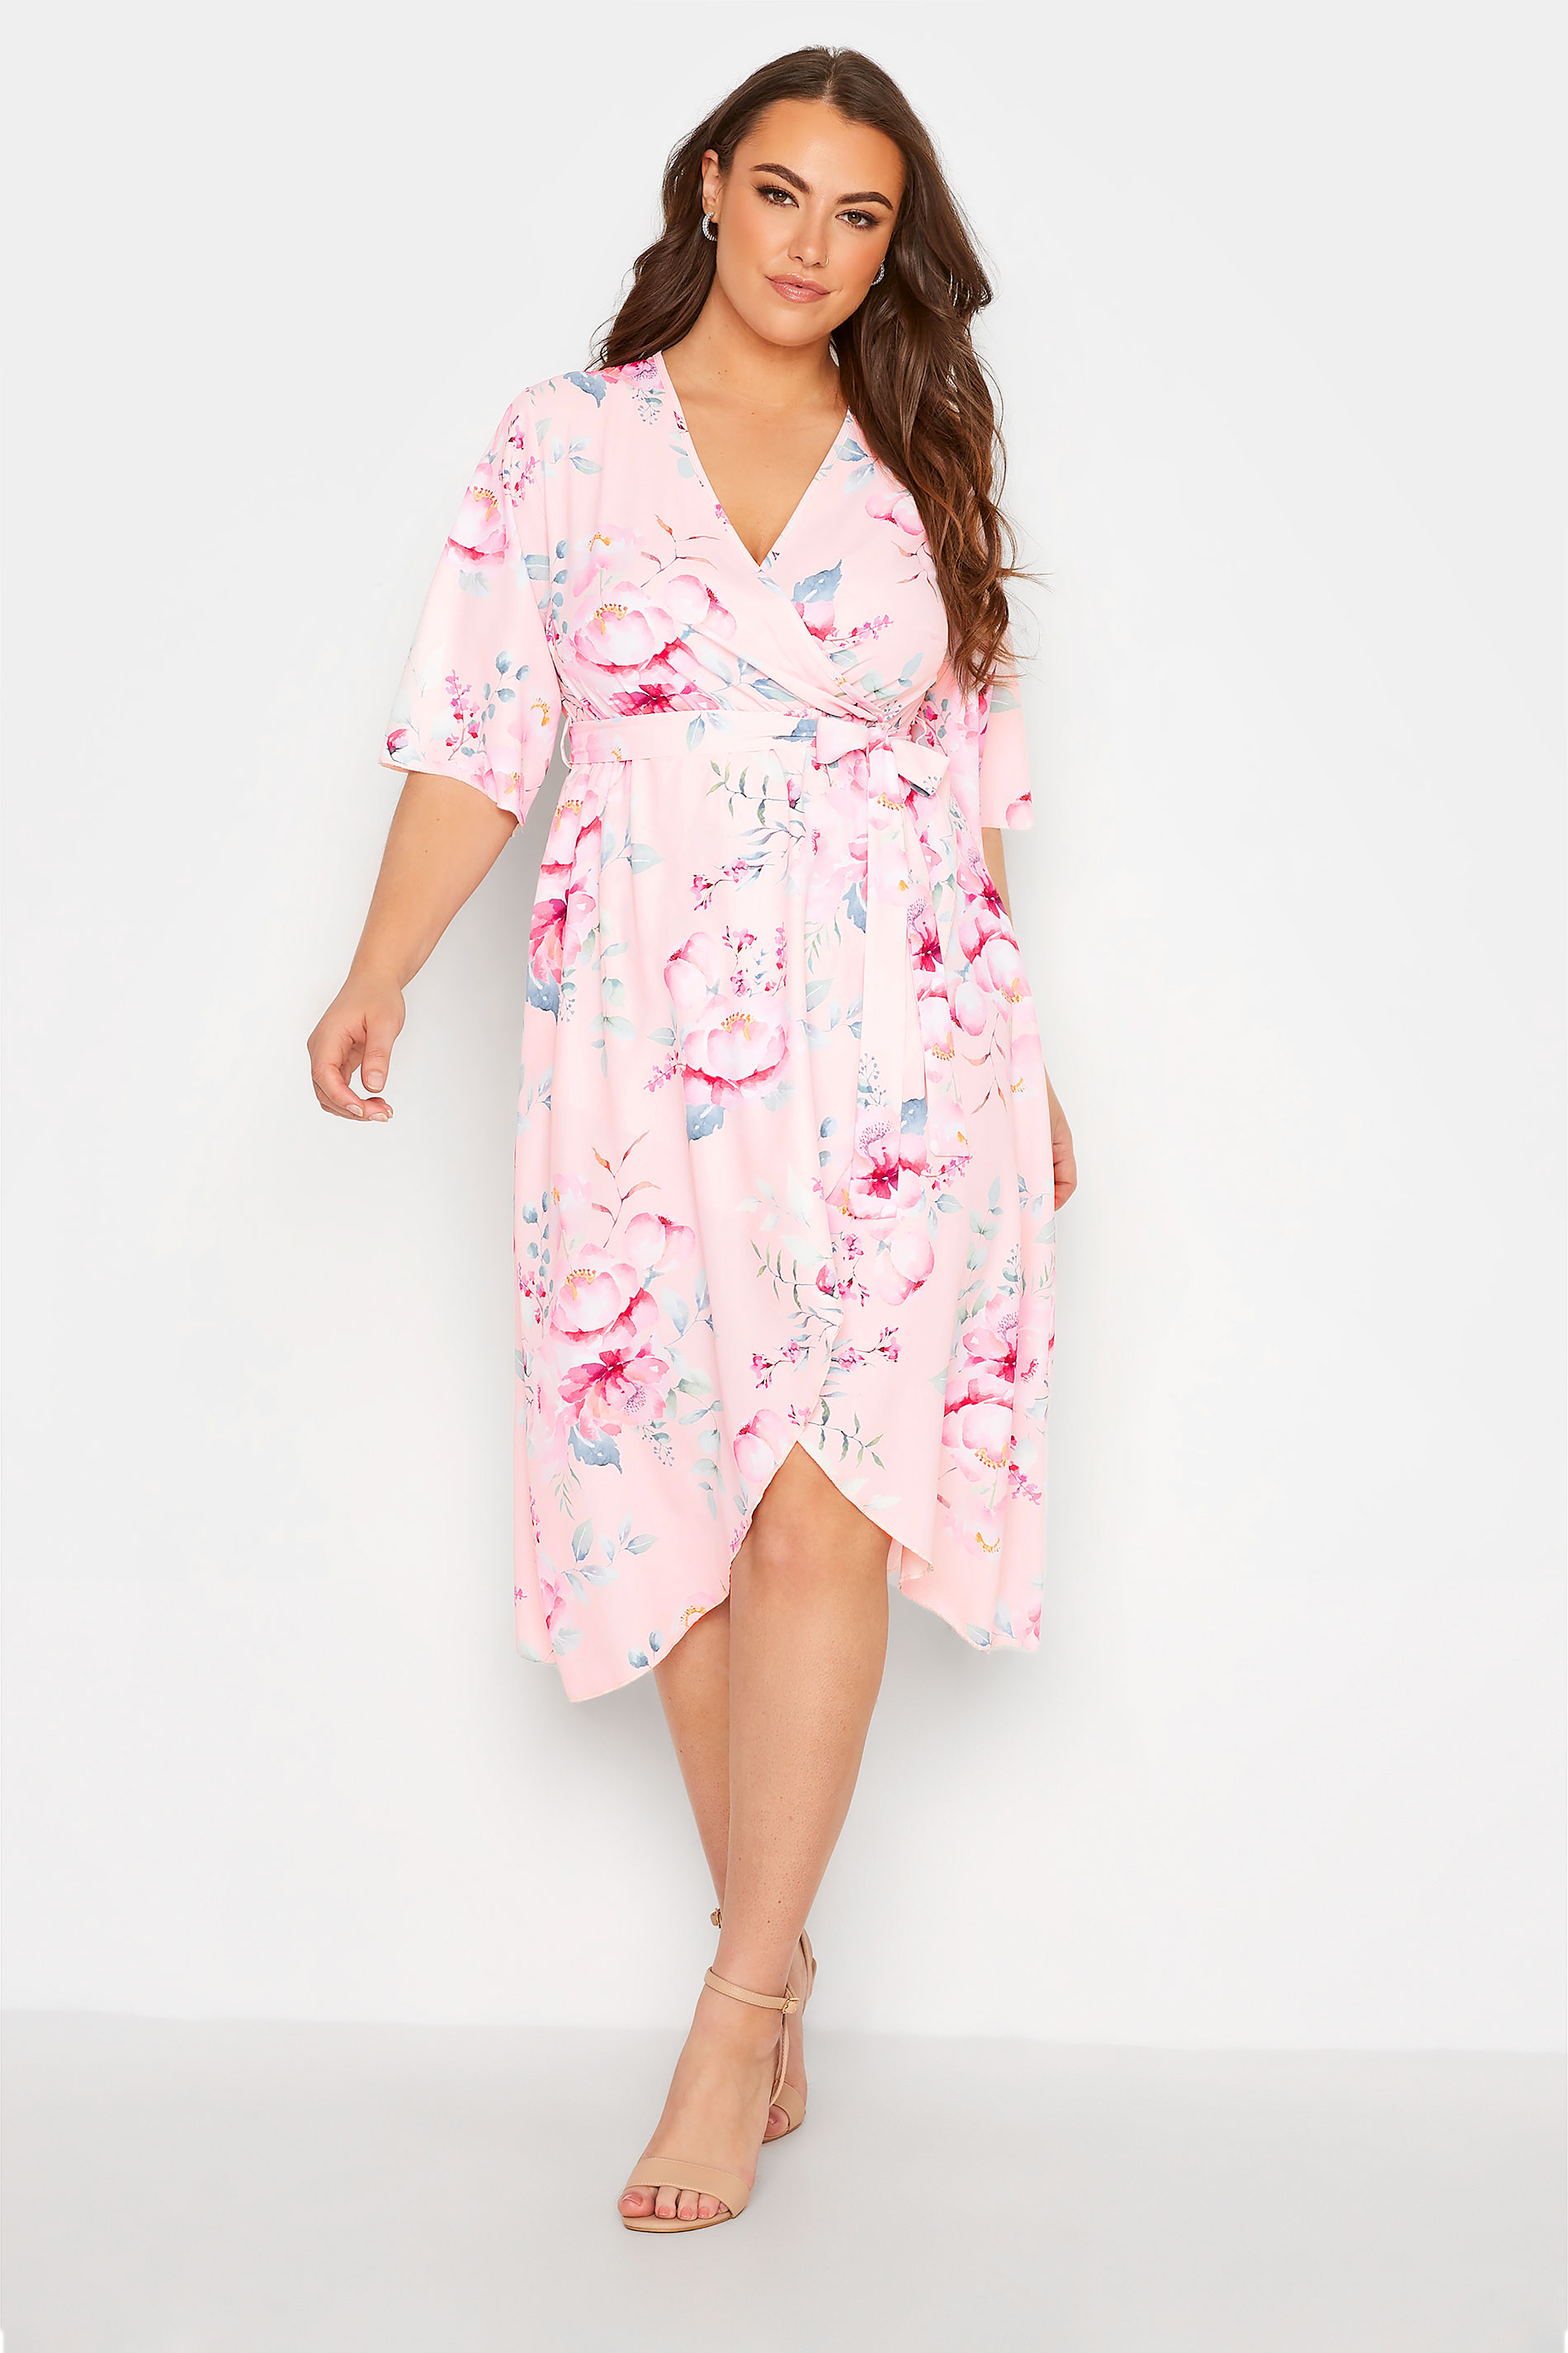 Robes Grande Taille Grande taille  Robes Portefeuilles | YOURS LONDON - Robe Rose Poudré Floral Style Portefeuille - FX64690